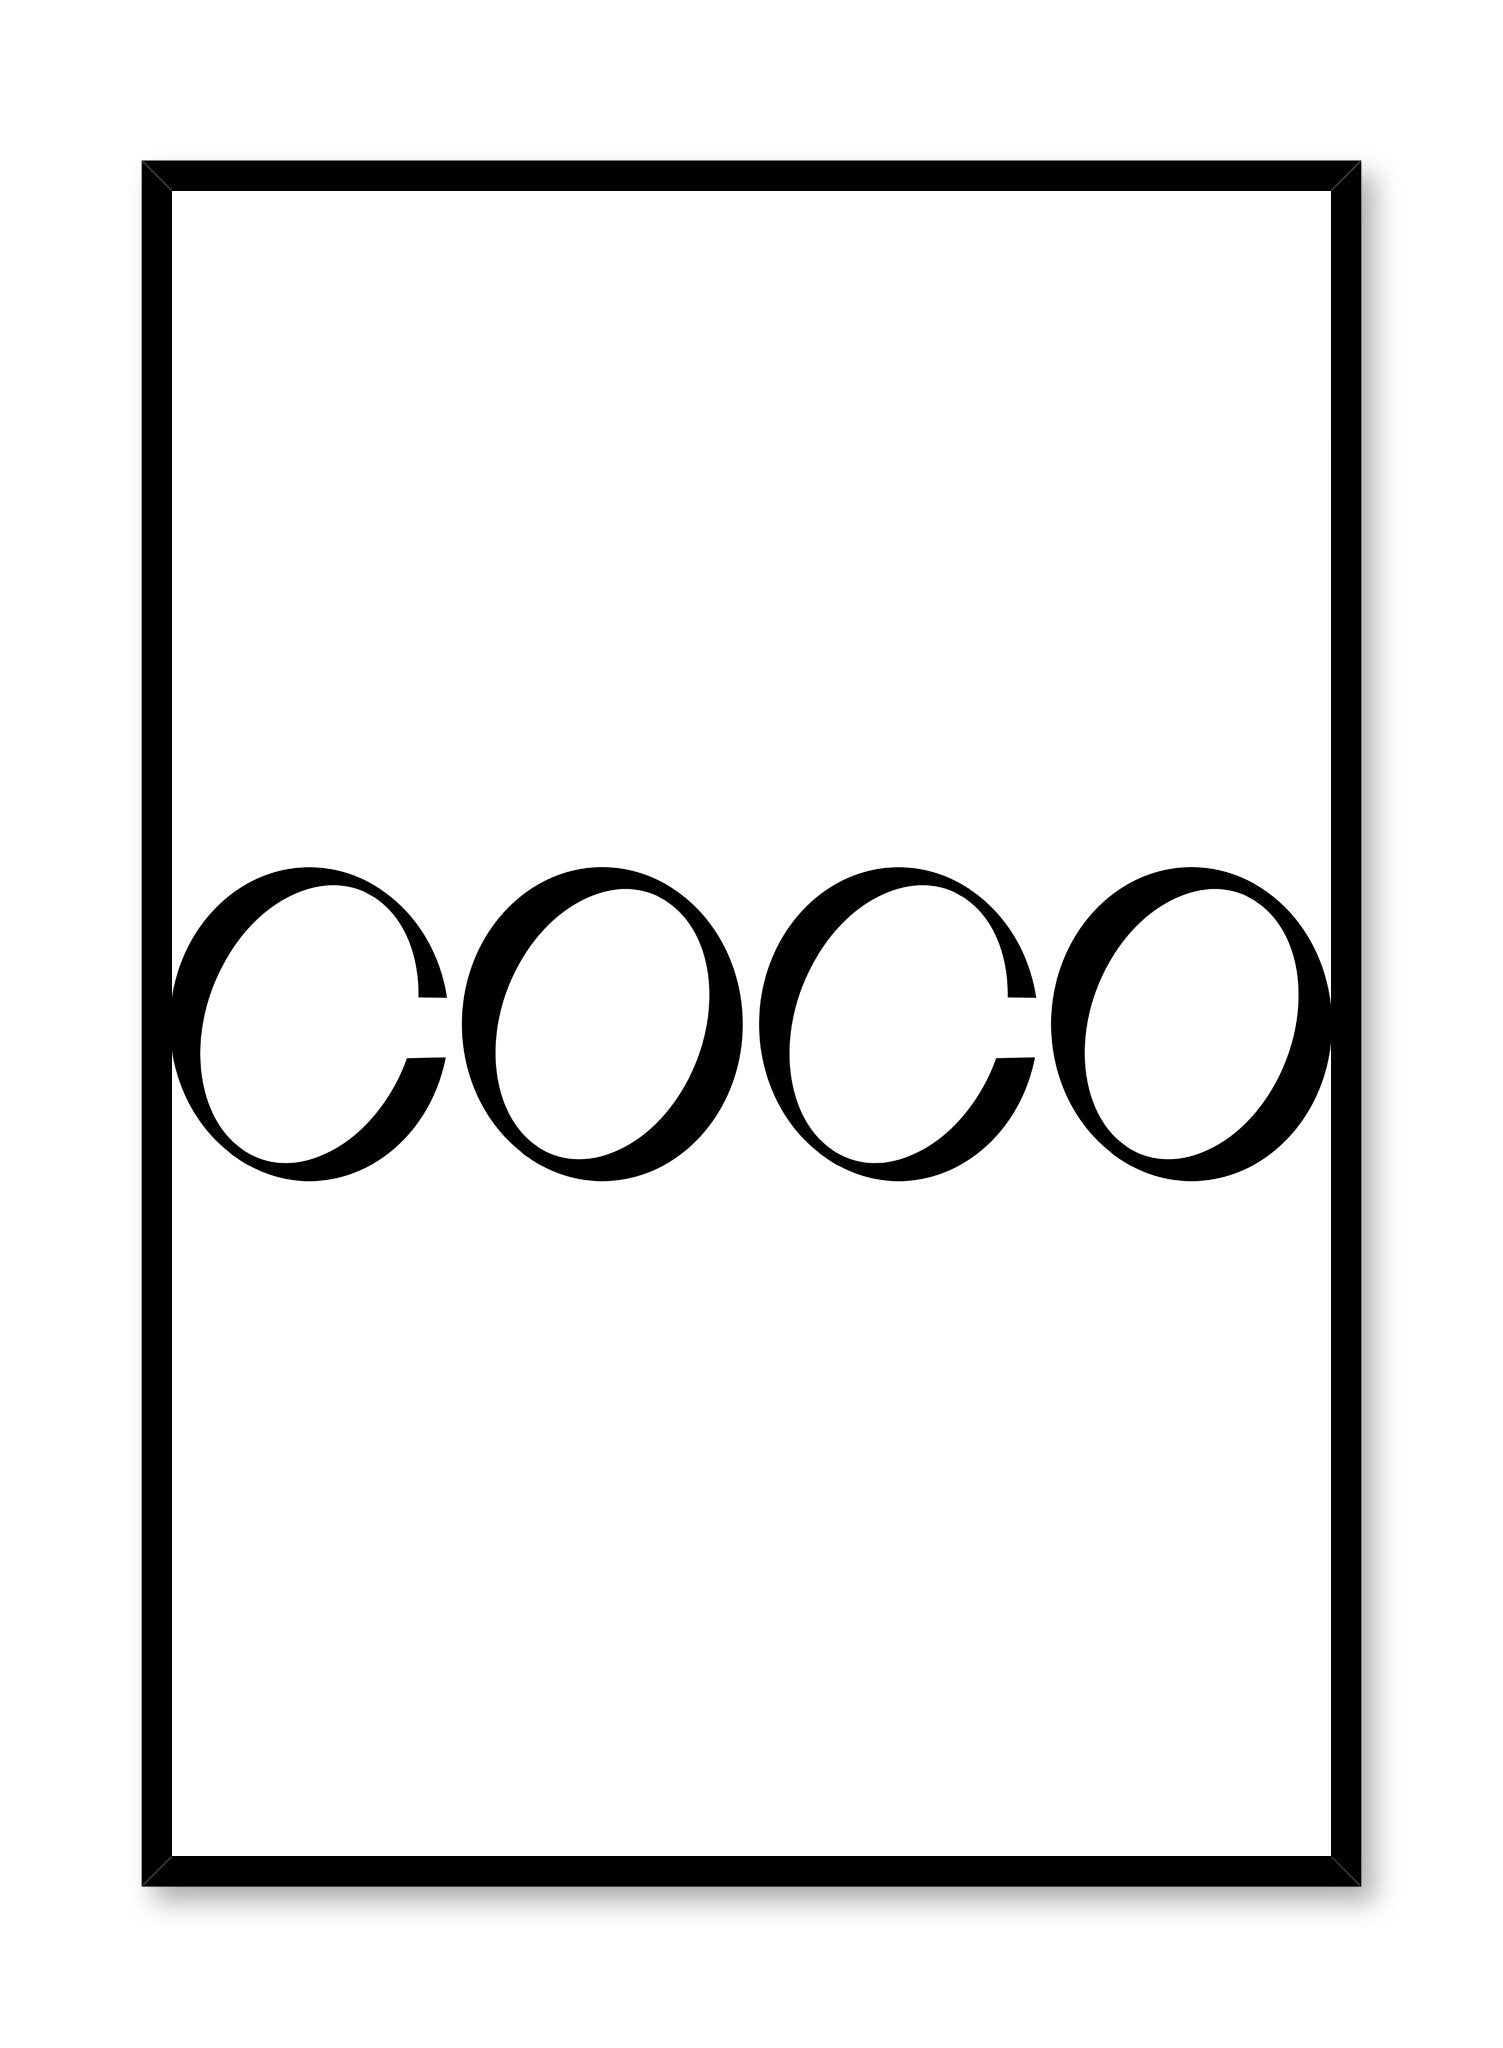 Typography poster by Opposite Wall with quote "coco" for Coco Chanel